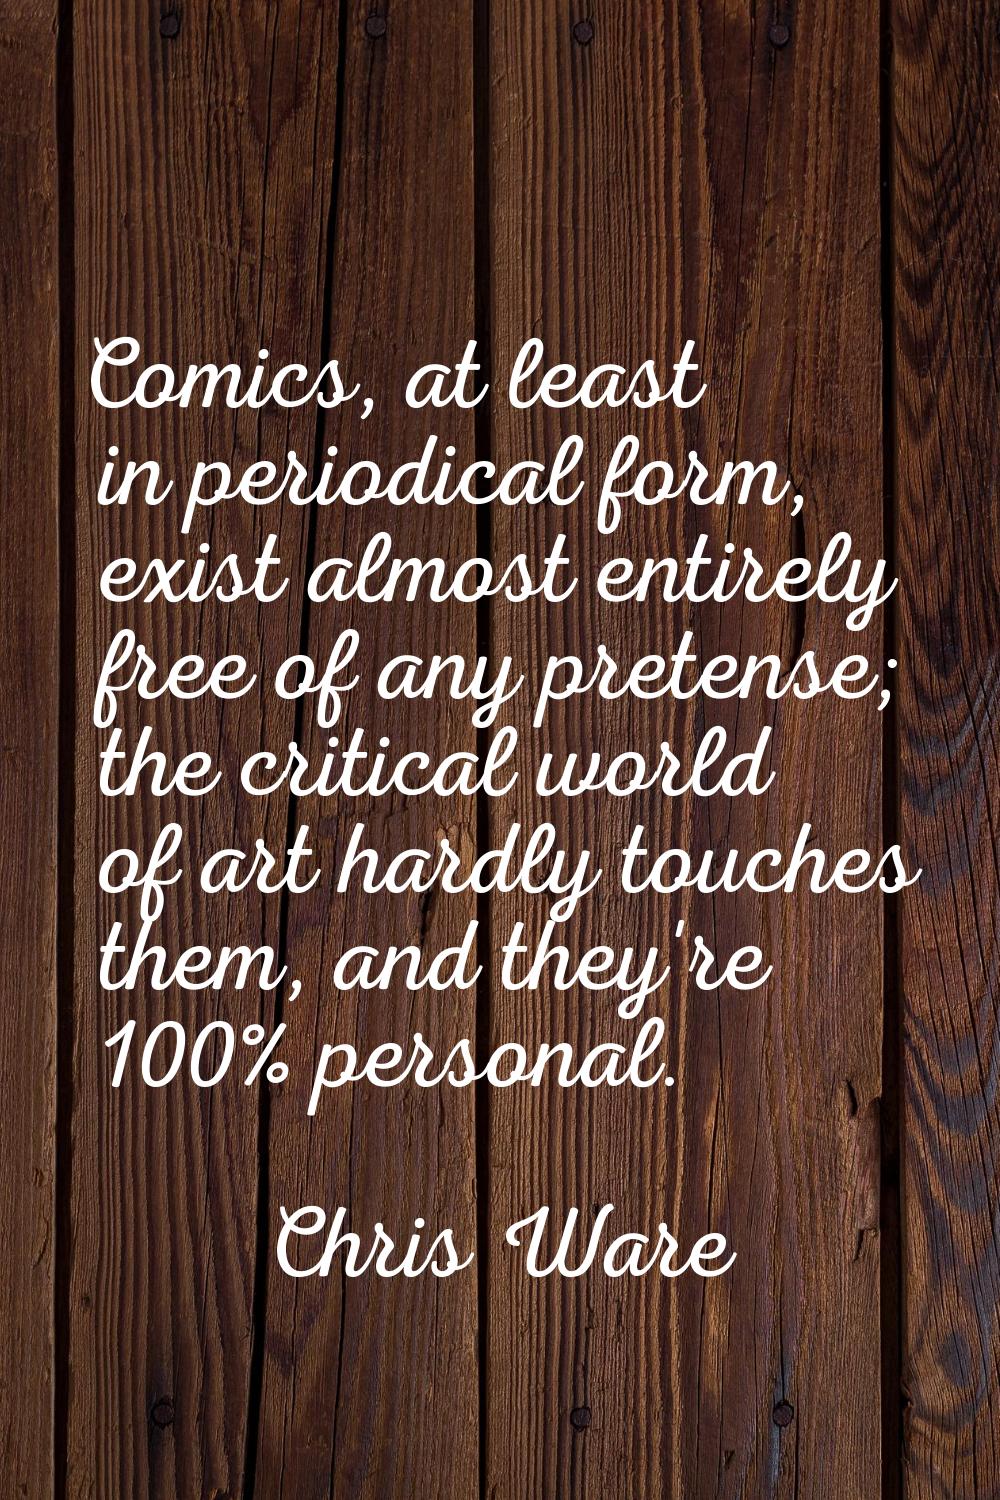 Comics, at least in periodical form, exist almost entirely free of any pretense; the critical world